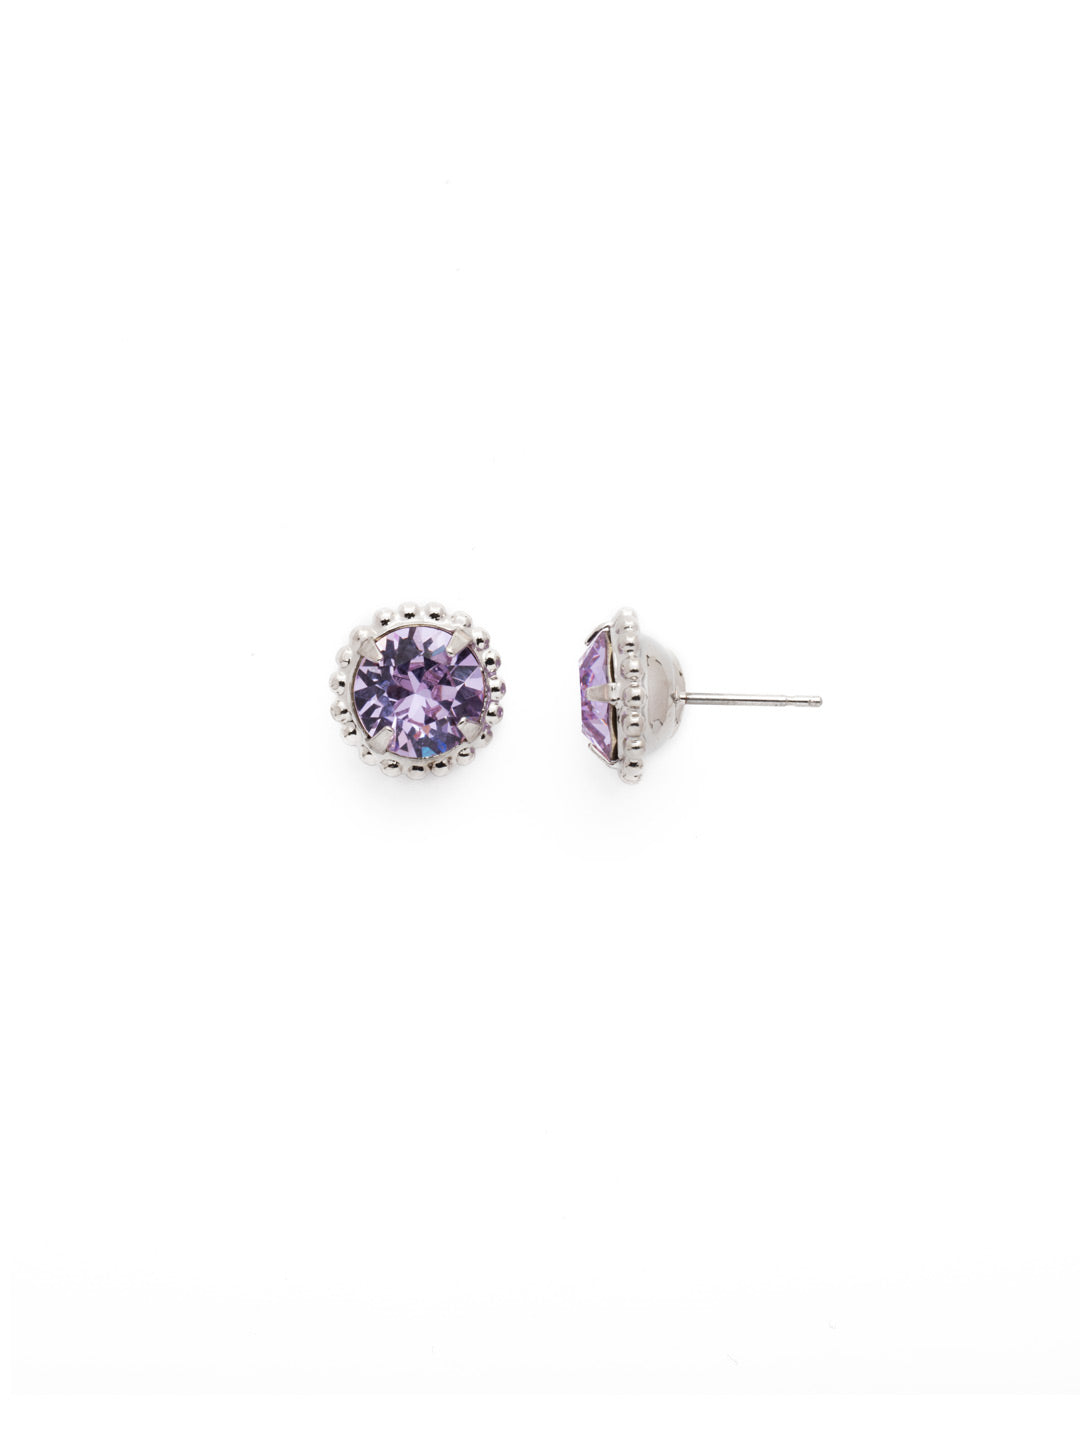 Simplicity Stud Earrings - EBY38RHVI - <p>A timeless classic, the Simplicity Stud Earrings feature round cut crystals in a variety of colors; accented with a halo of metal beaded detail. Need help picking a stud? <a href="https://www.sorrelli.com/blogs/sisterhood/round-stud-earrings-101-a-rundown-of-sizes-styles-and-sparkle">Check out our size guide!</a> From Sorrelli's Violet collection in our Palladium Silver-tone finish.</p>